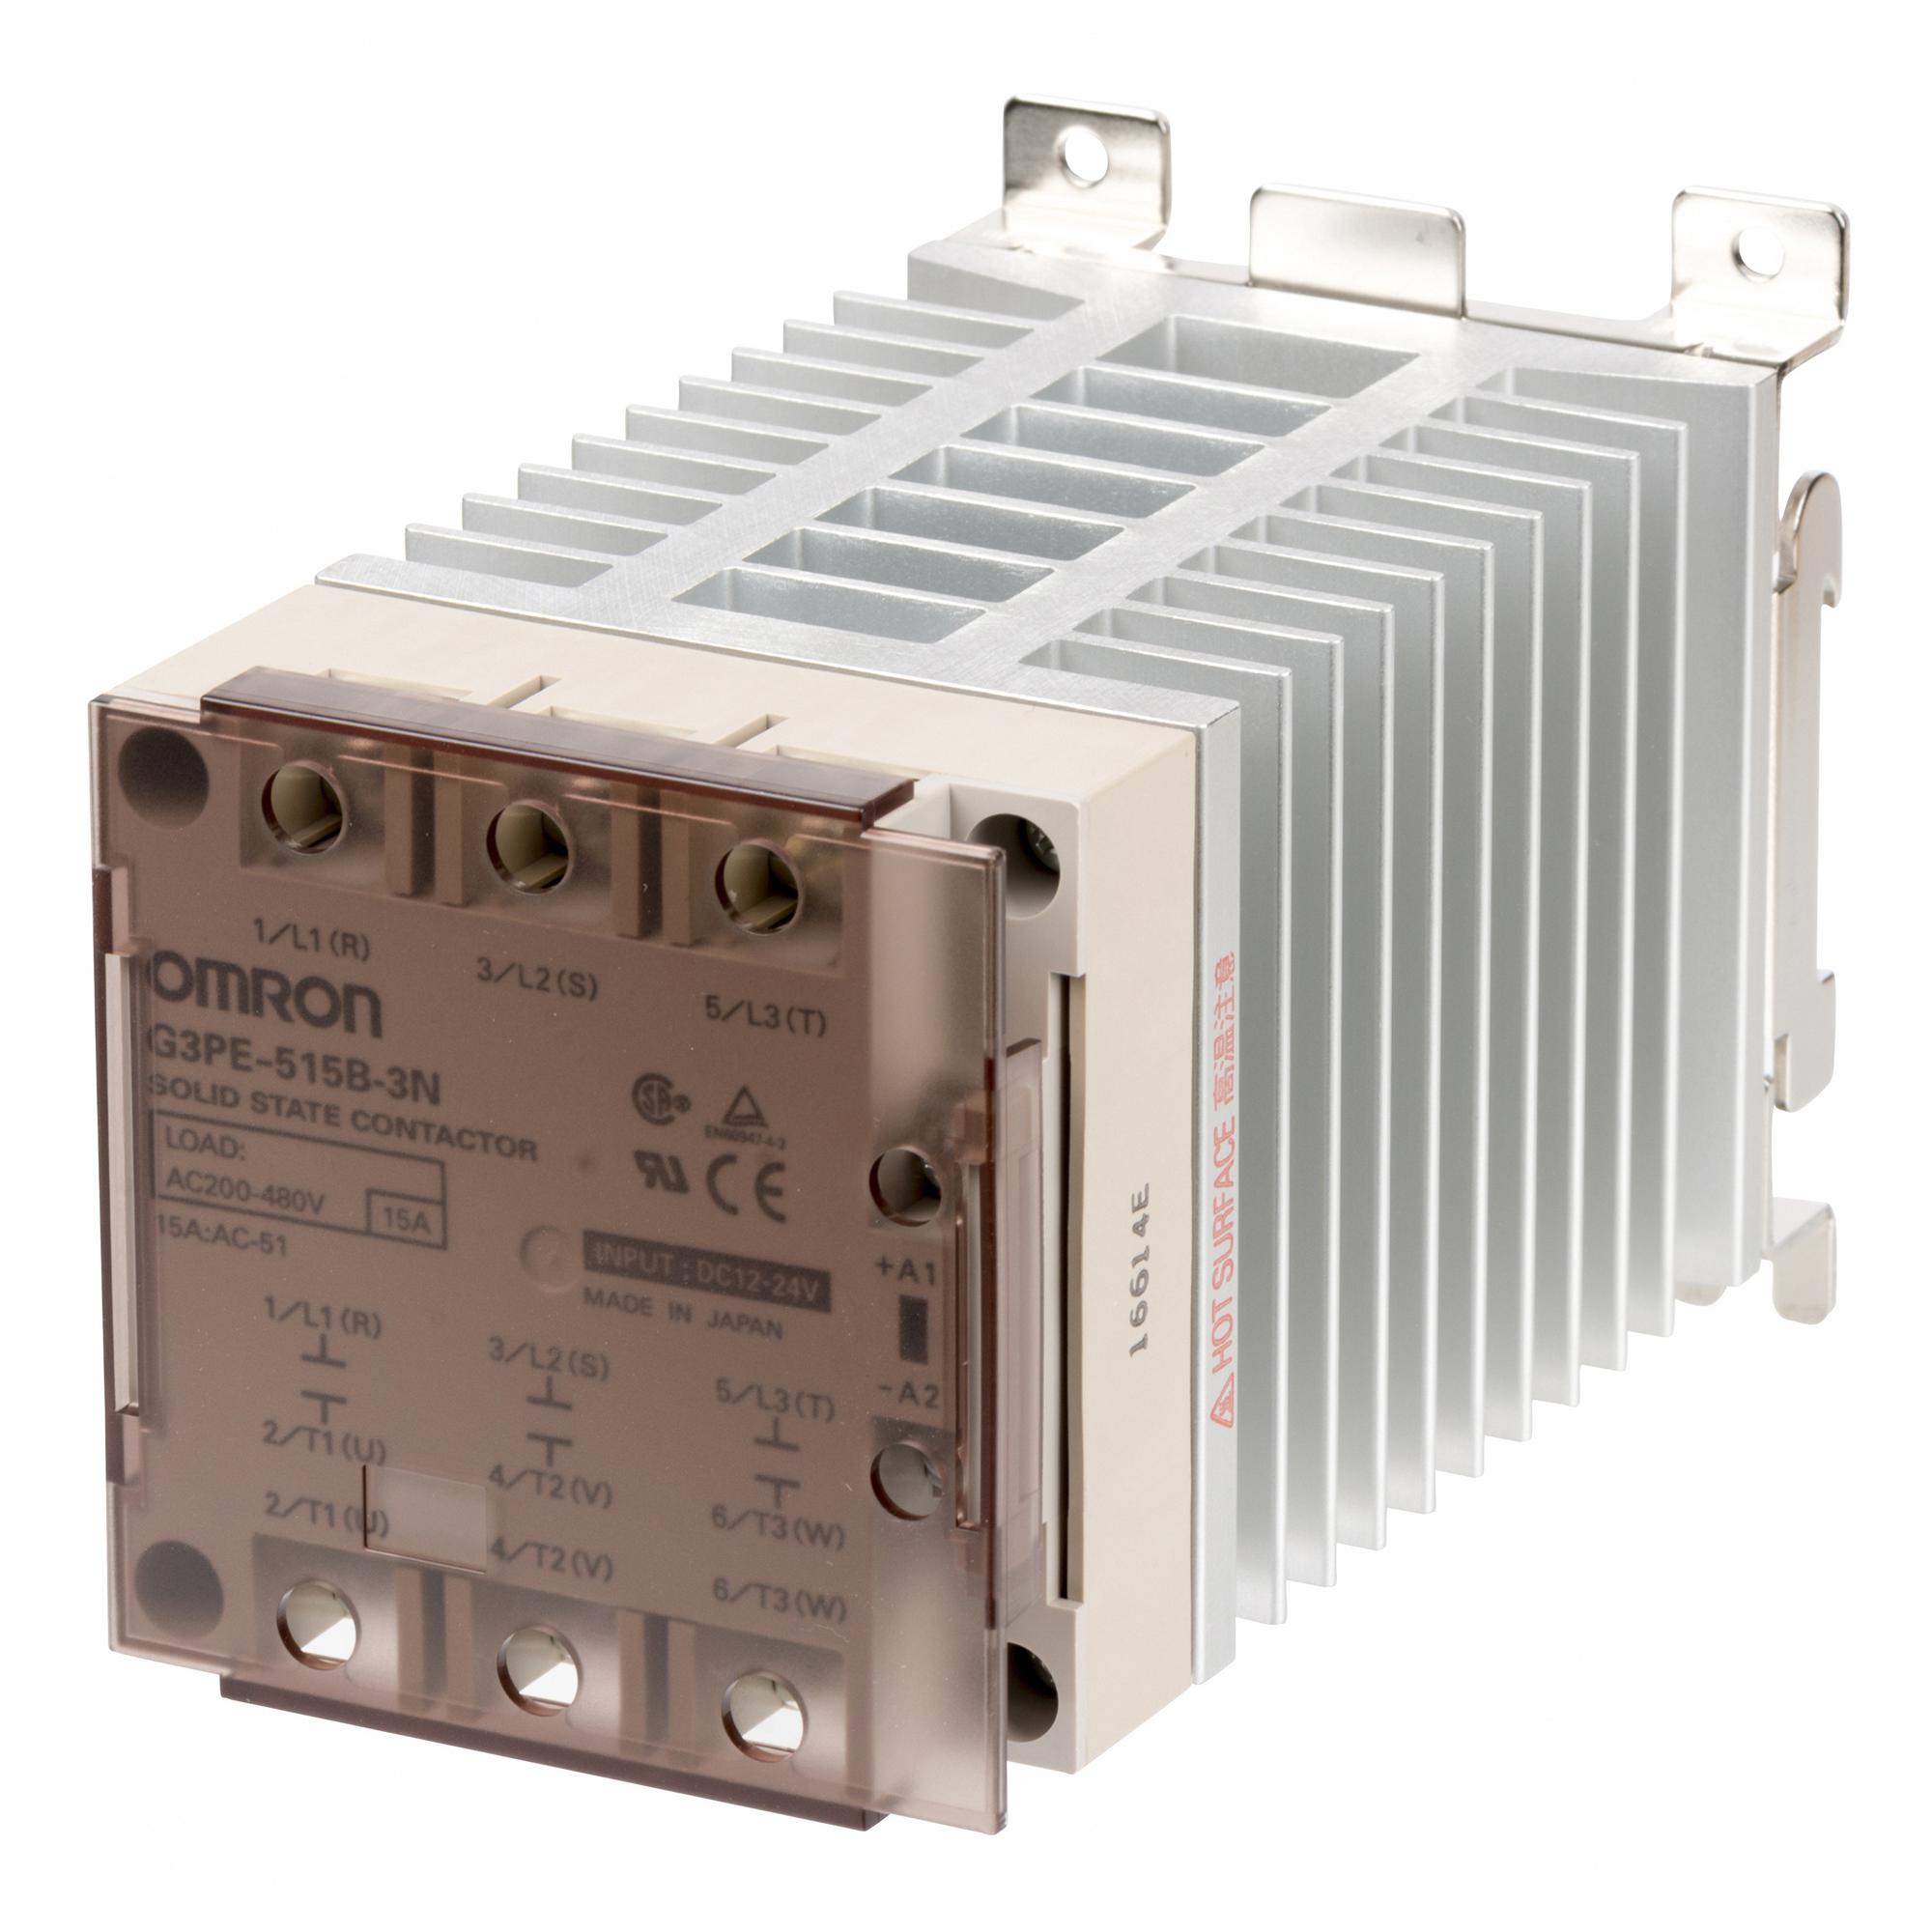 G3PE-515B-2N 12-24VDC SOLID STATE RELAYS OMRON